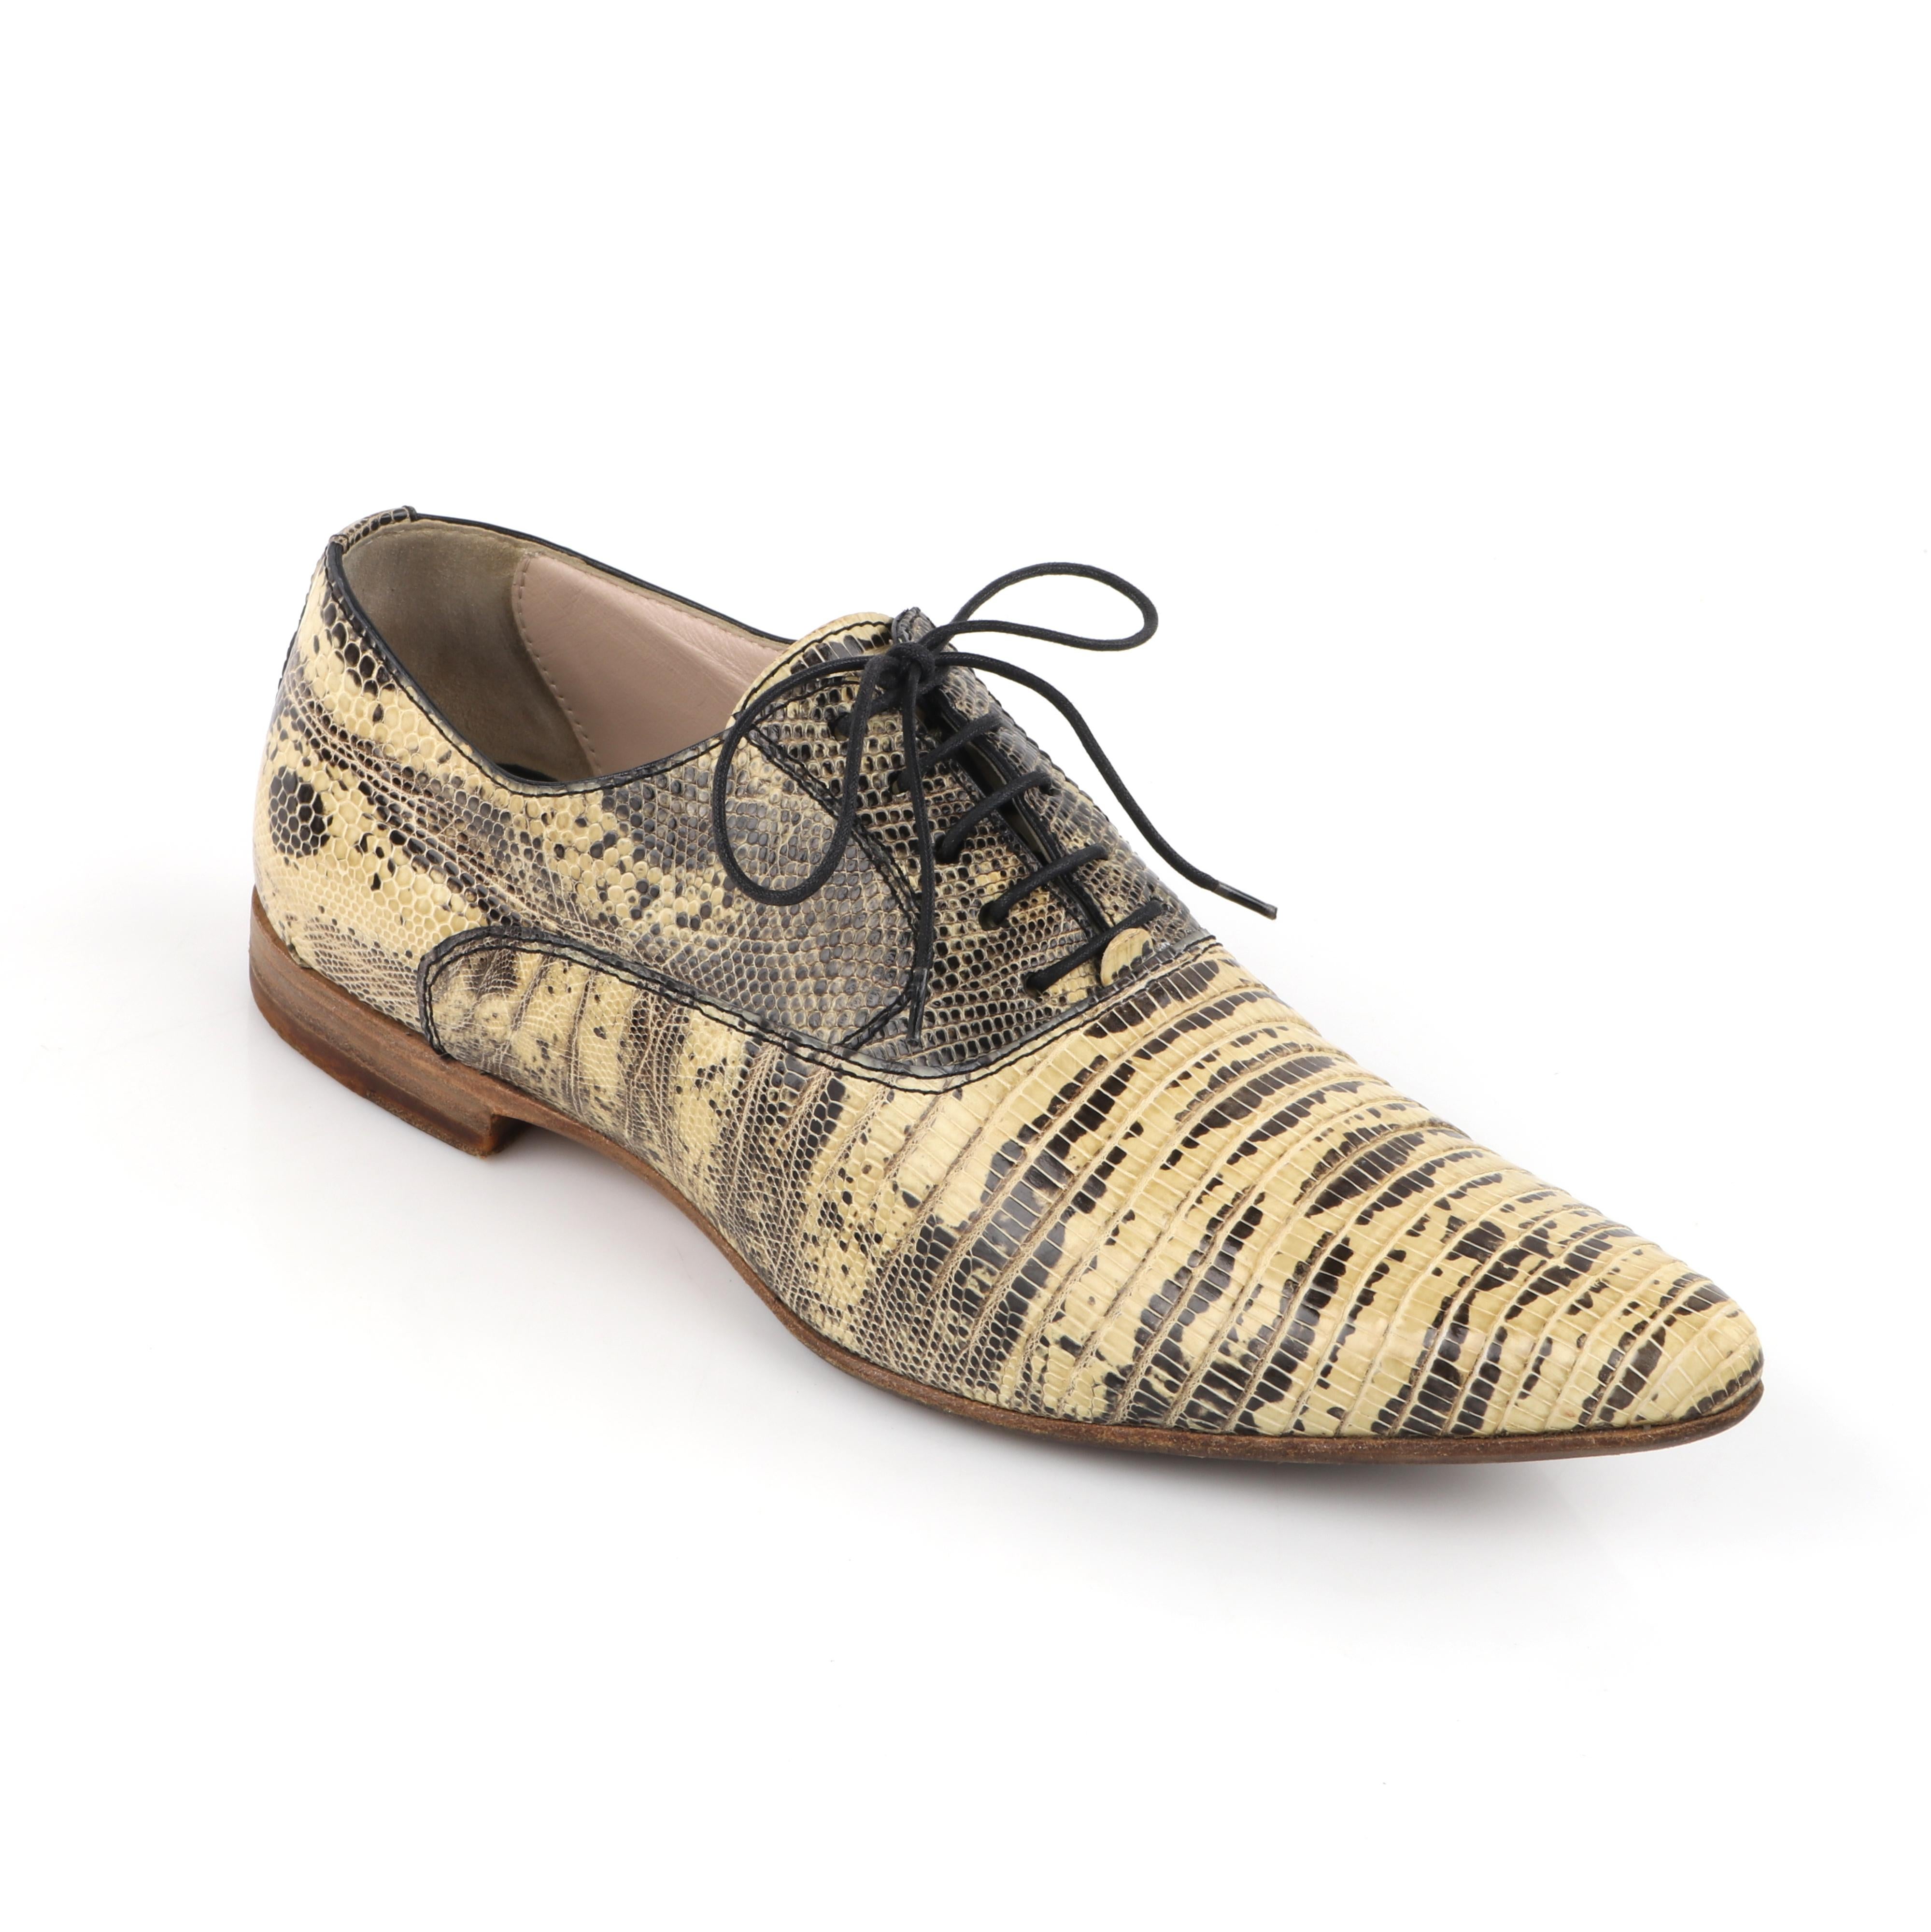 Brand / Manufacturer: Alexander McQueen
Circa: 2010
Designer: Alexander McQueen
Style: Galosh Oxford Dress Shoe
Color(s): Shades of green, yellow, black, beige, brown
Lined: Yes
Unmarked Fabric Content (feel of): Snakeskin (exterior), leather